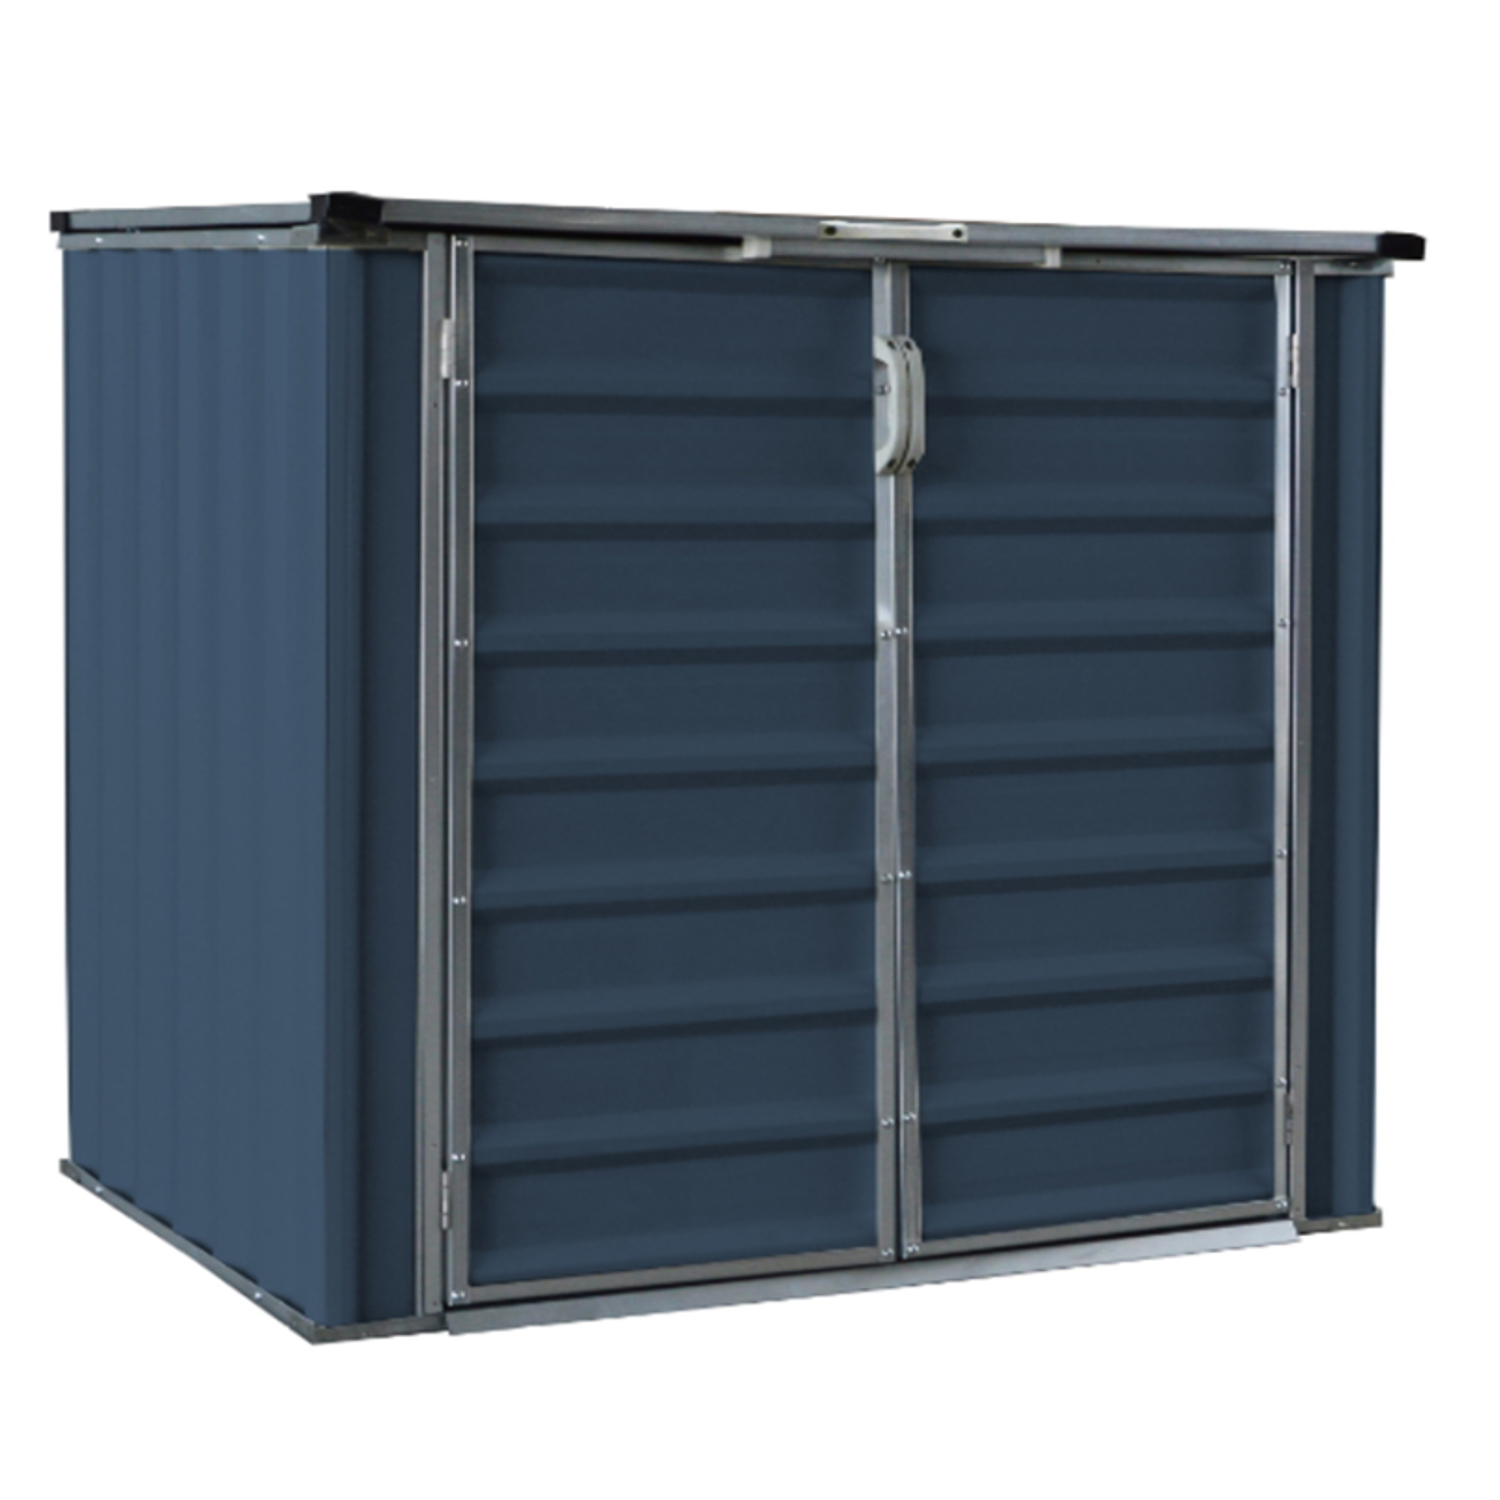 Build-Well 6 ft. x 4 ft. Metal Horizontal Modern Storage Shed without Floor Kit -  BW0604HSH-GY